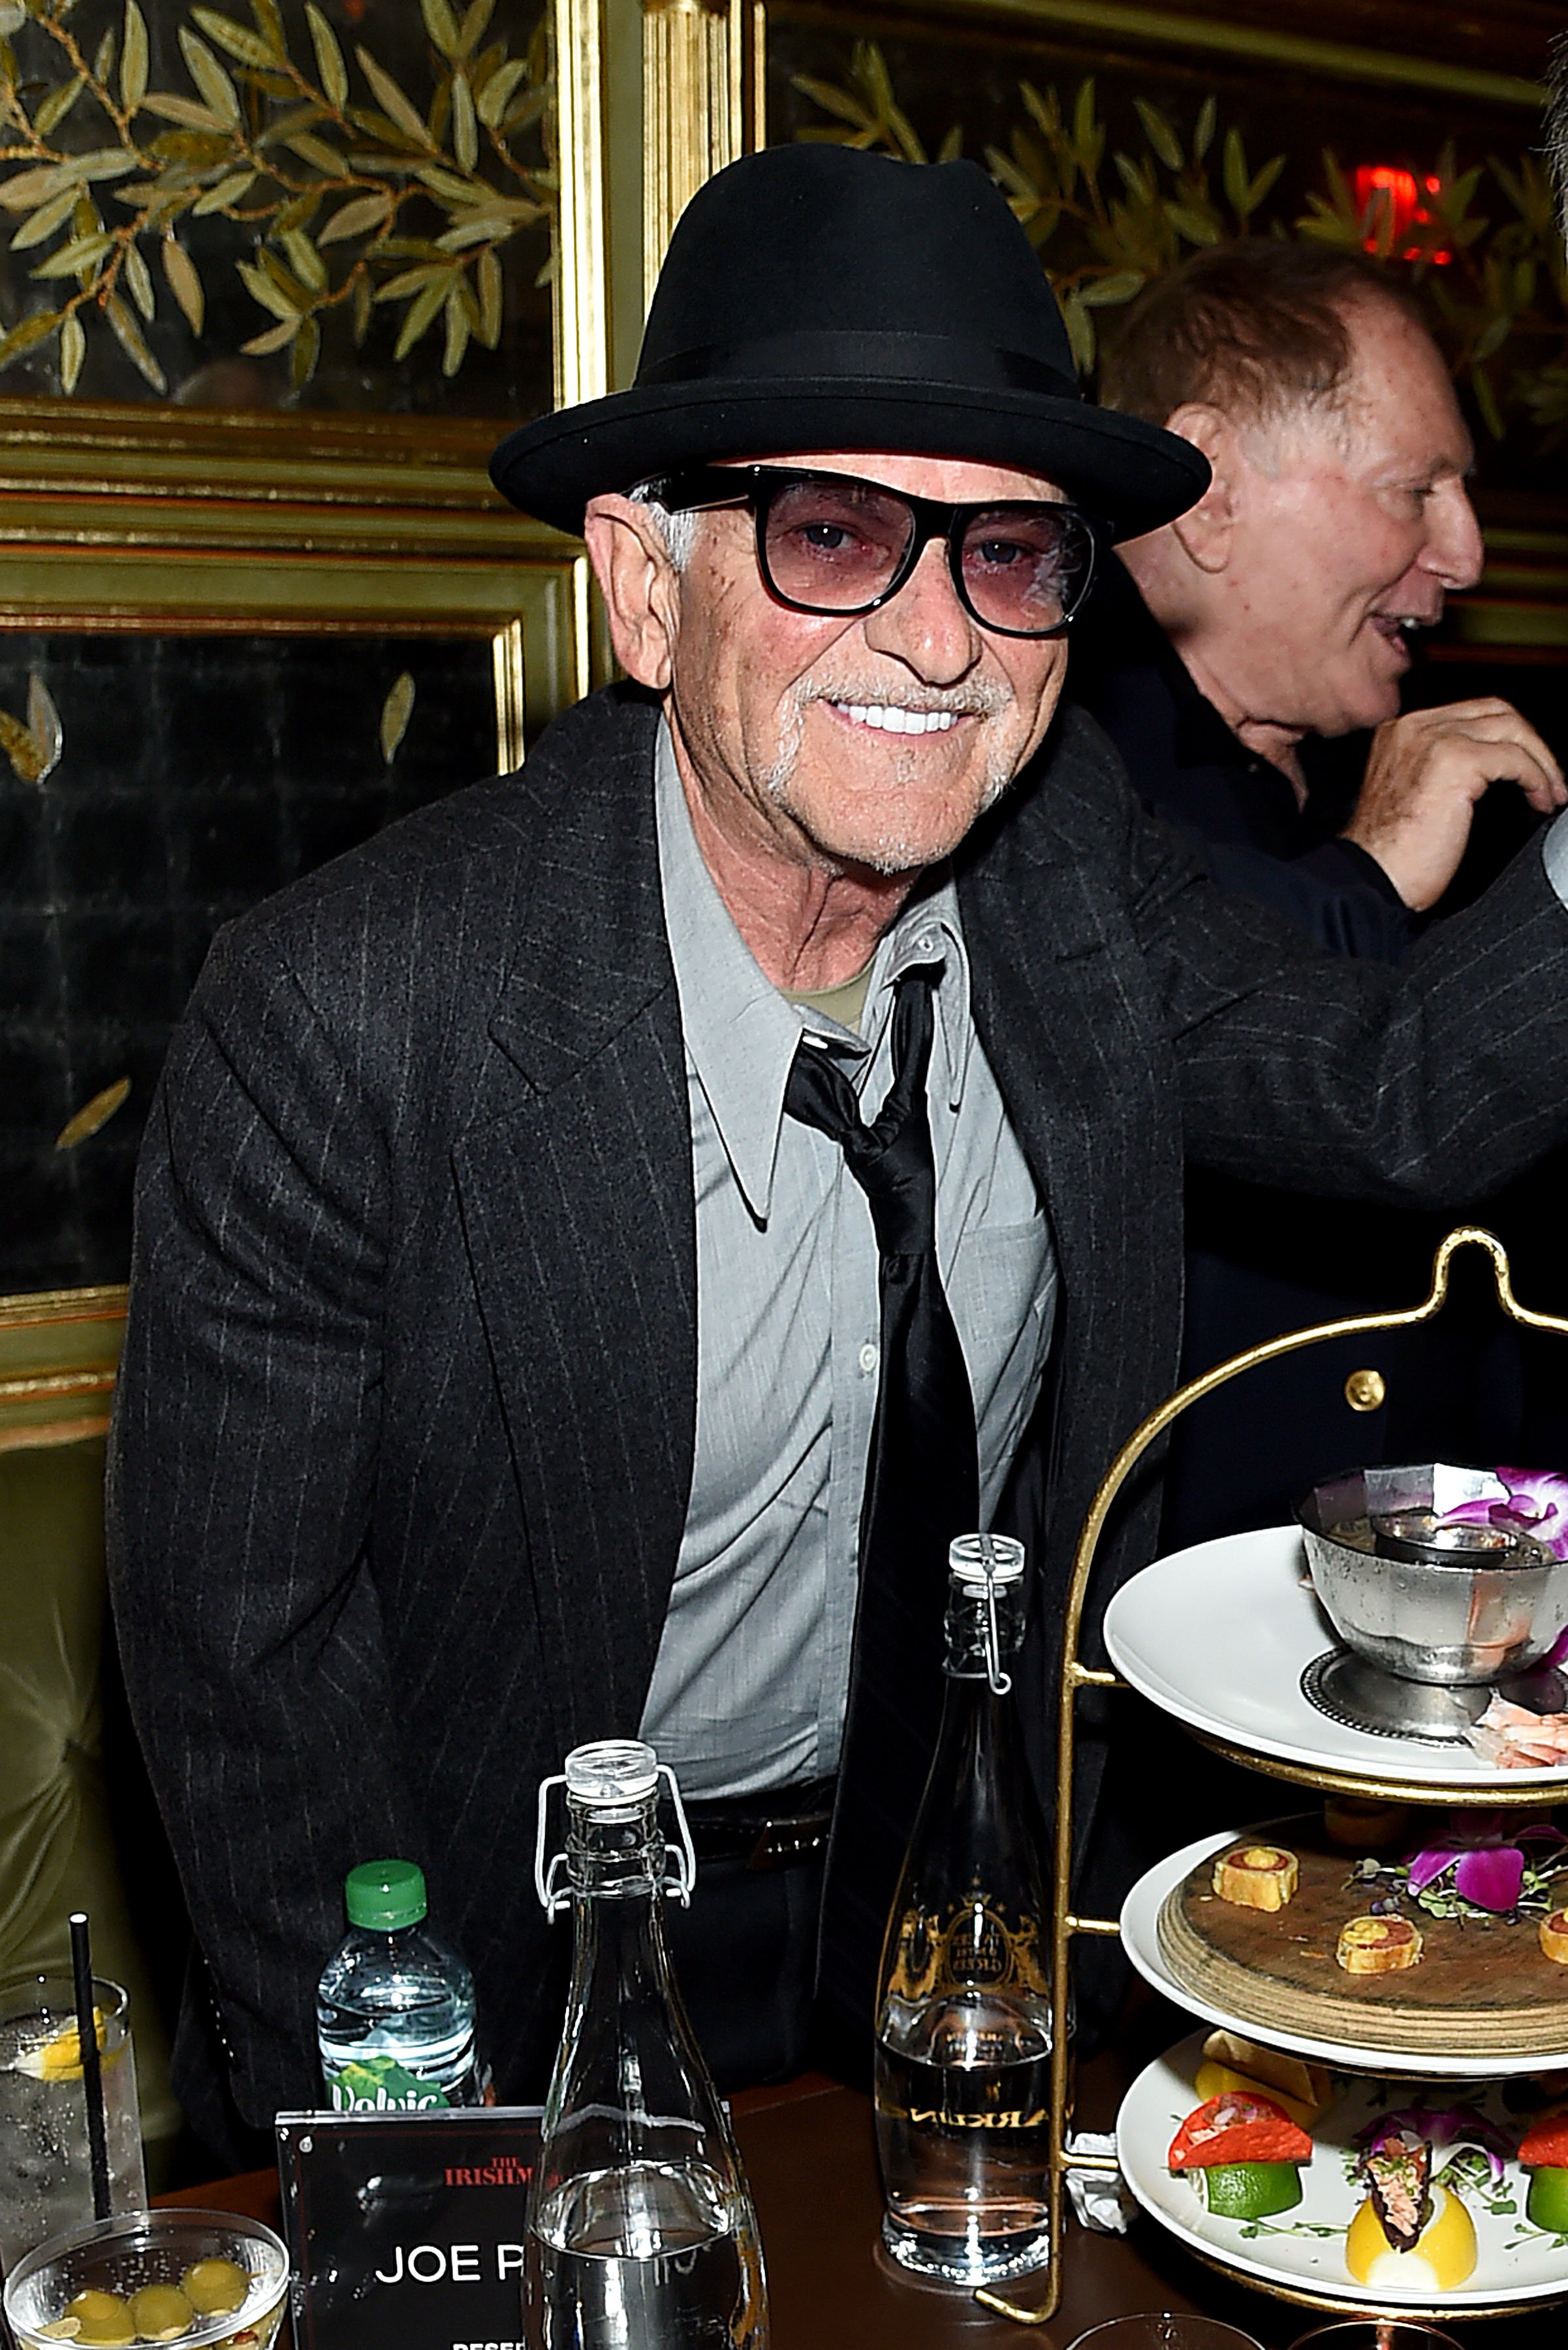 Joe Pesci during the 57th New York Film Festival - "The Irishman" After Party at Tavern On The Green on September 27, 2019 in New York City. | Source: Getty Images